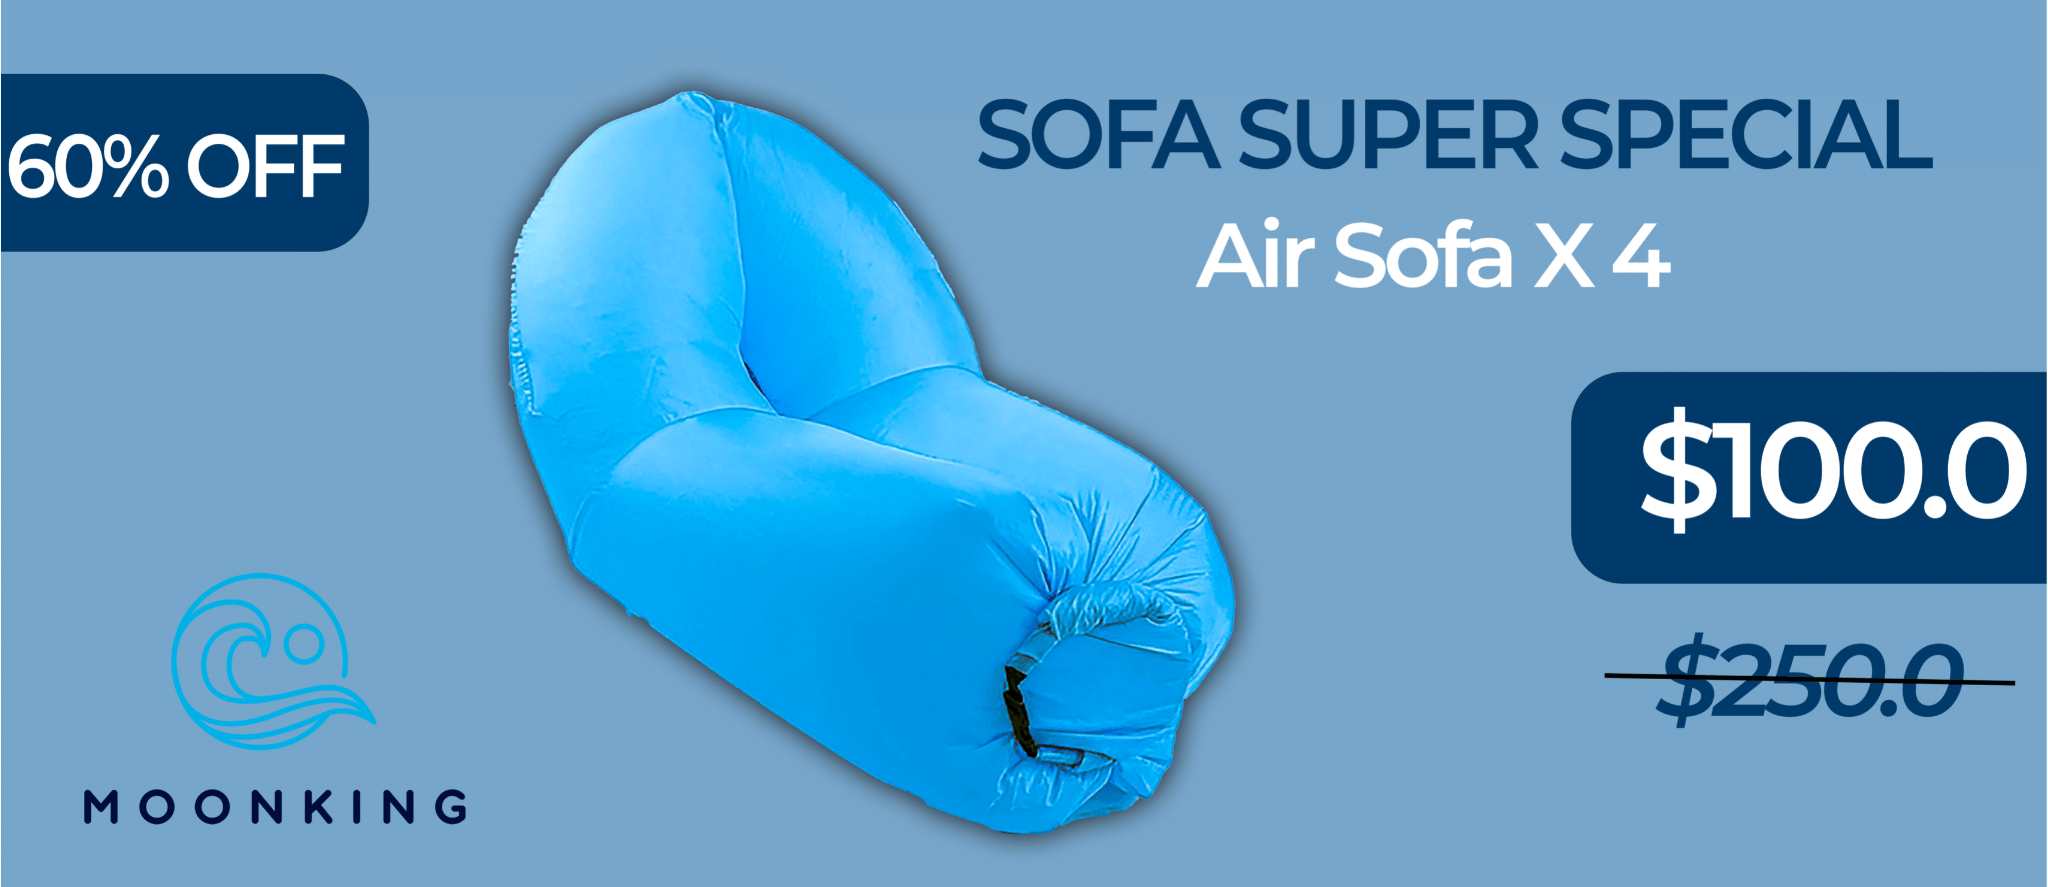 Moonking Outdoor Air Sofa Super Special